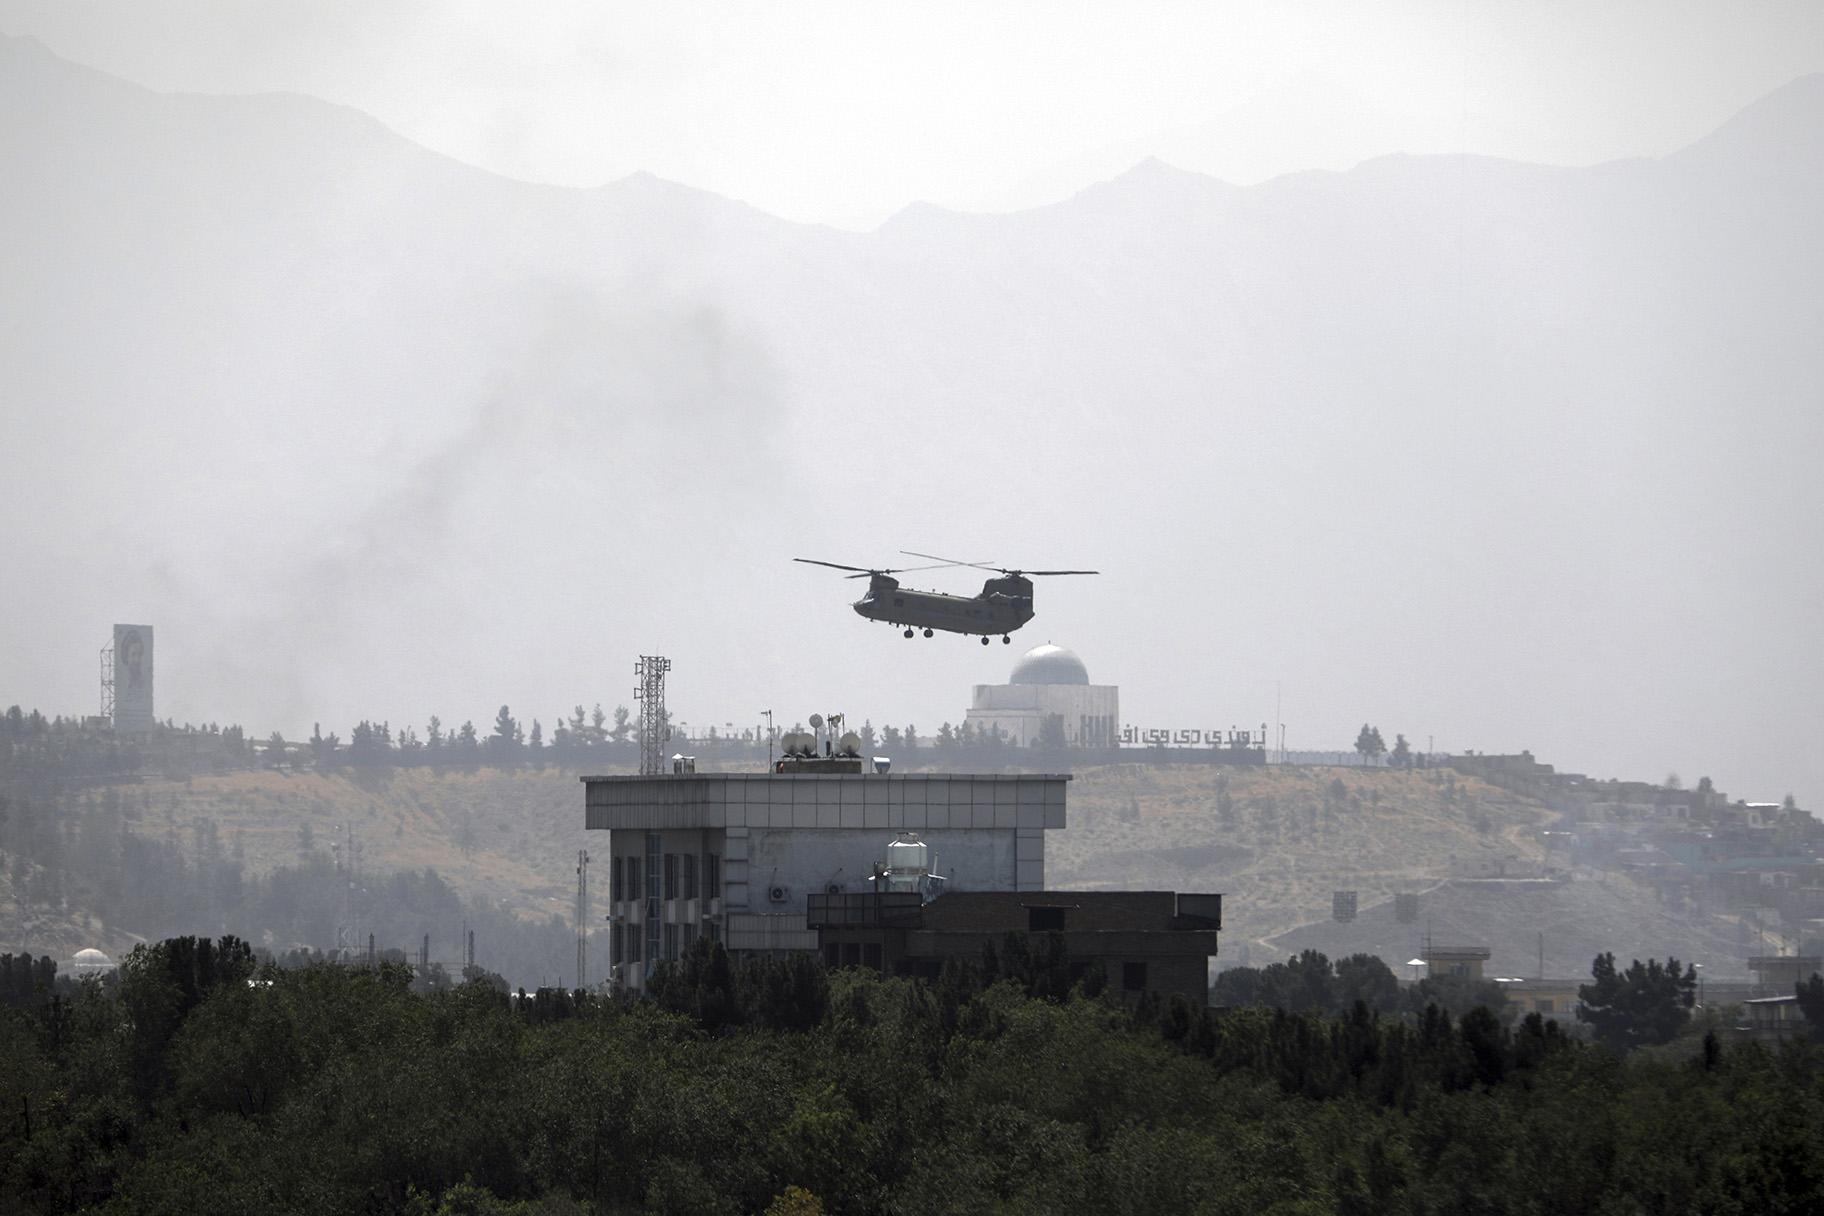 A U.S. Chinook helicopter flies over the U.S. Embassy in Kabul, Afghanistan, Sunday, Aug. 15, 2021. (AP Photo / Rahmat Gul)